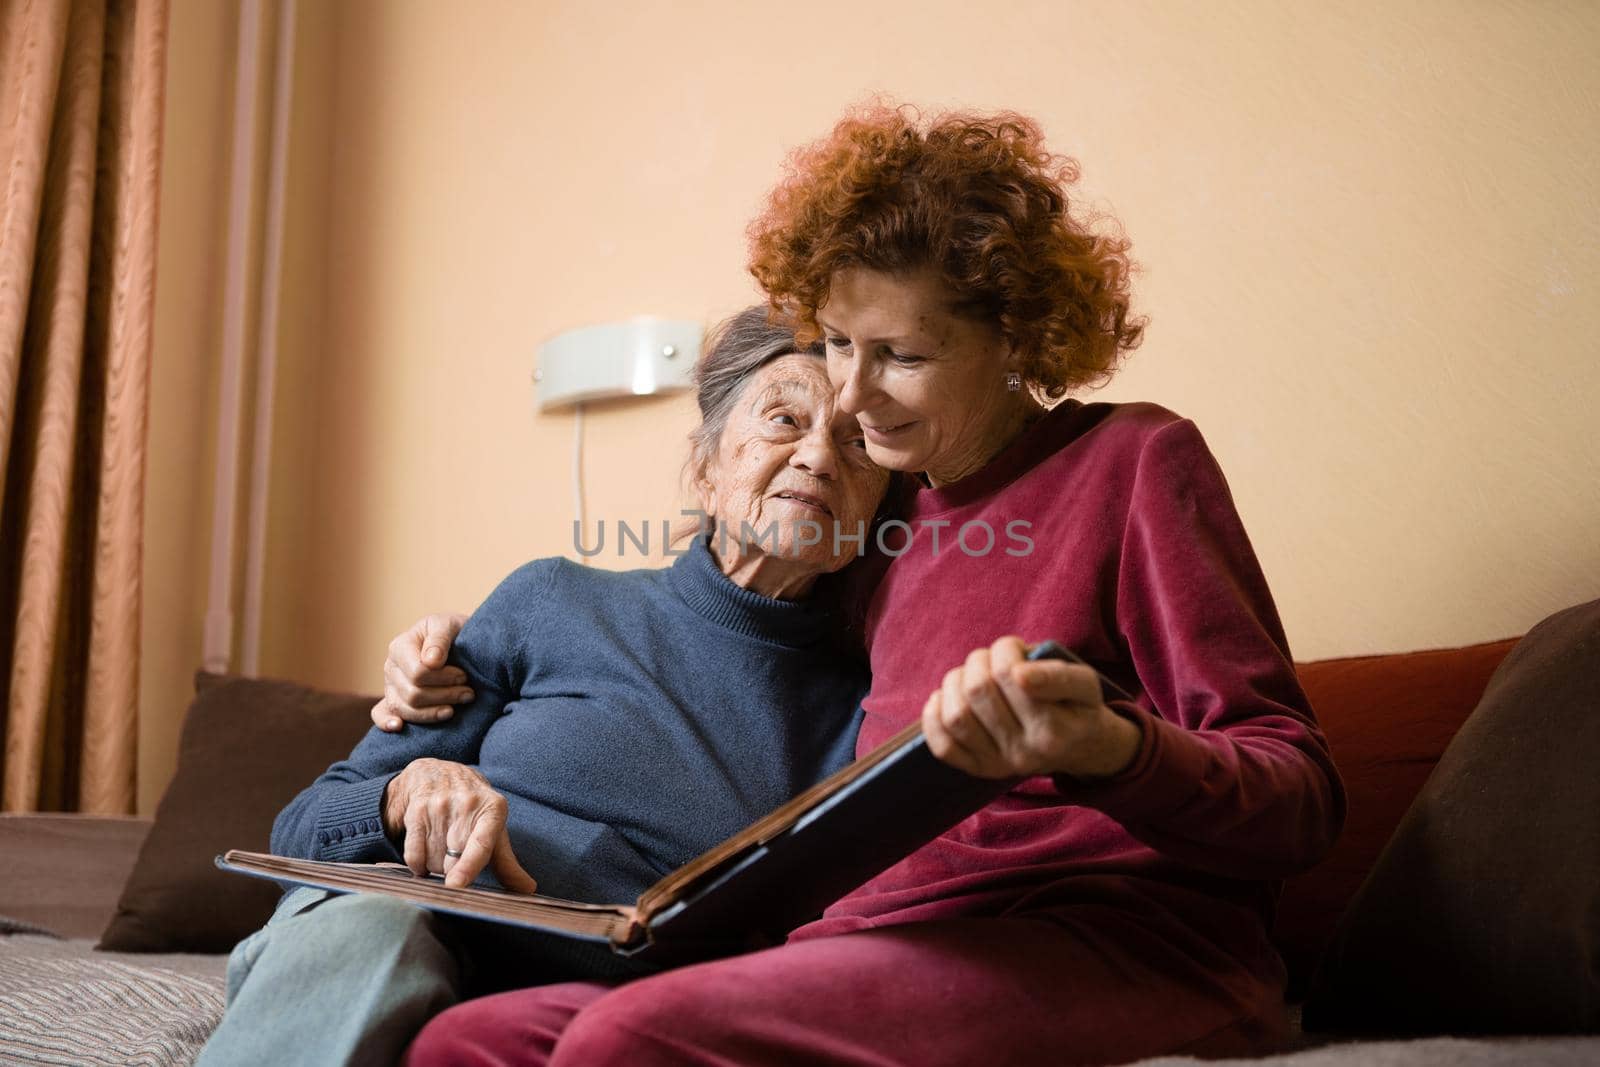 Mature daughter visits senior mother and has fun watching family photo album, sitting in embrace in living room couch. Mothers Day. Elderly woman and old gray hair grandmother laugh, remember youth by Tomashevska